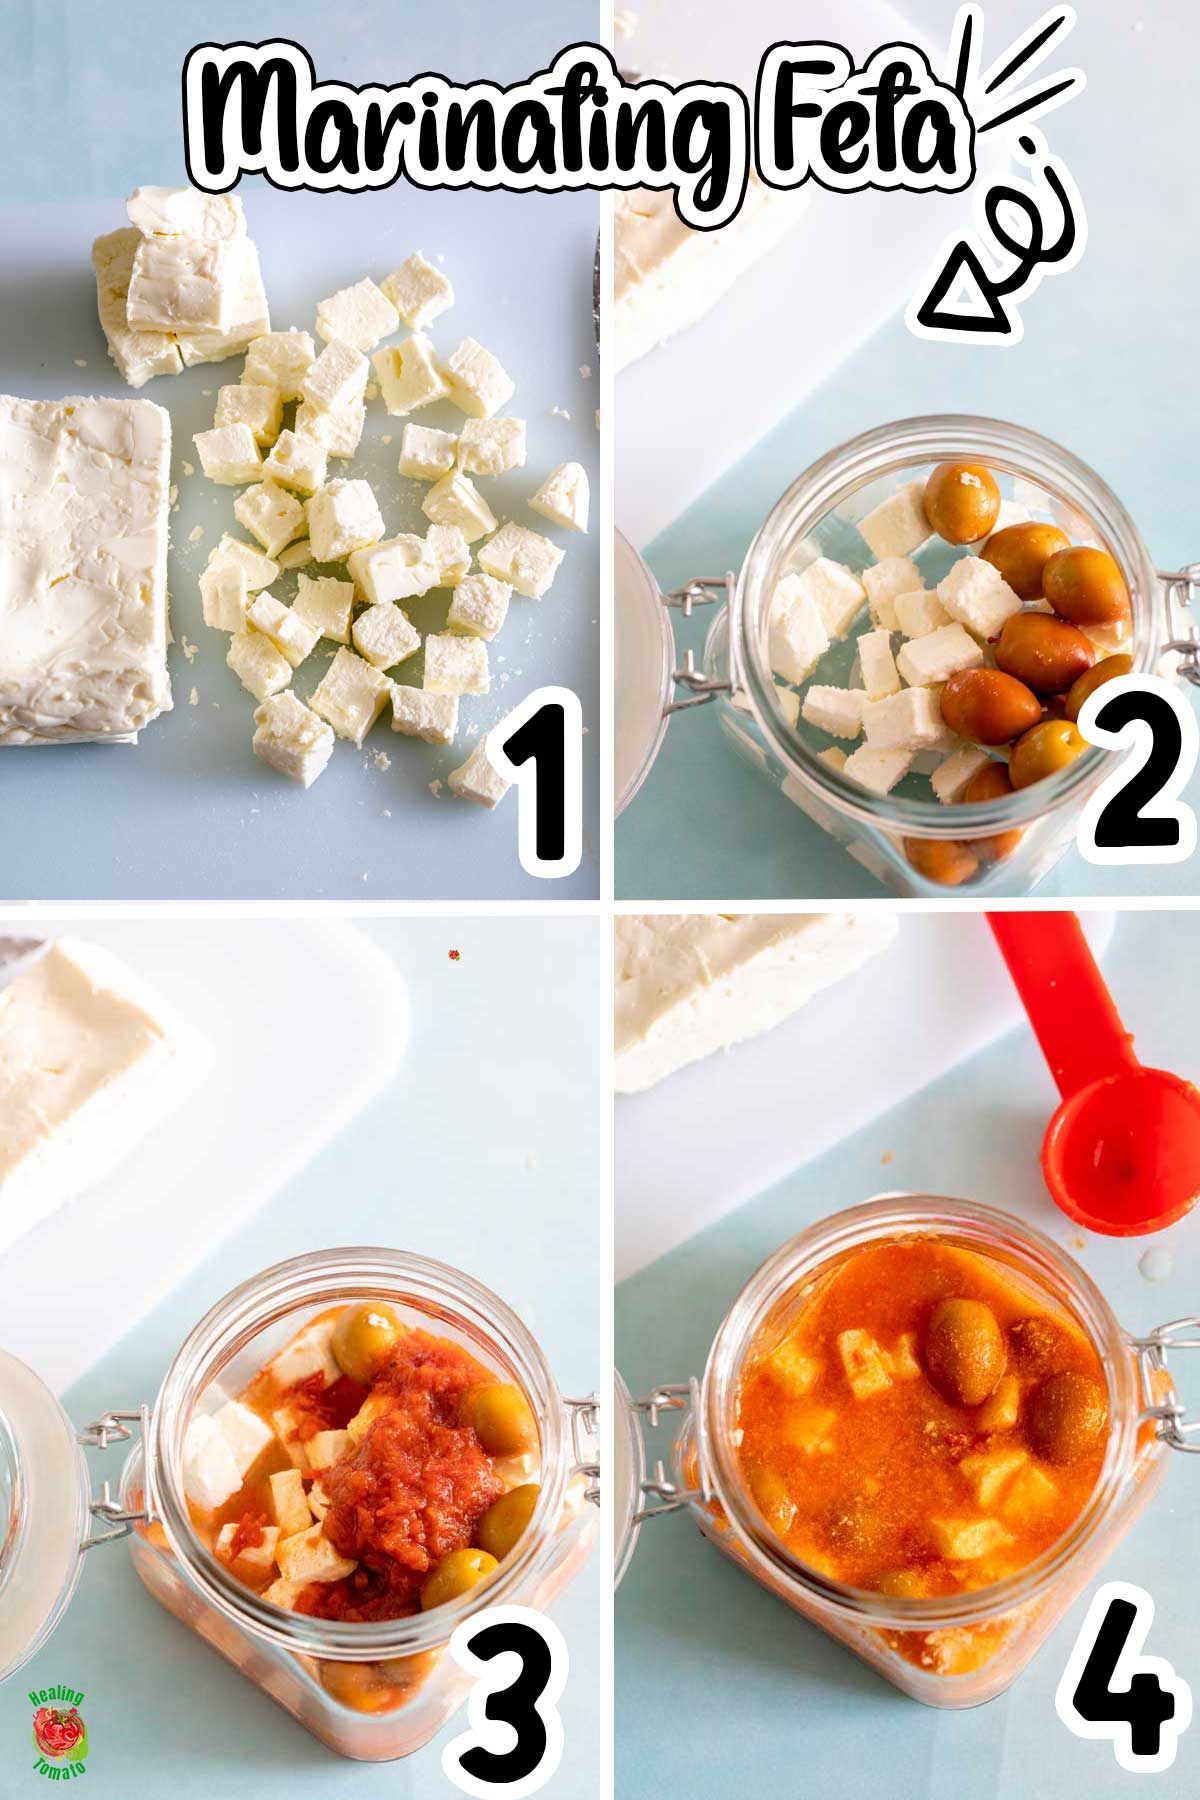 Top view of a collage of 4 images outlining how to marinate feta